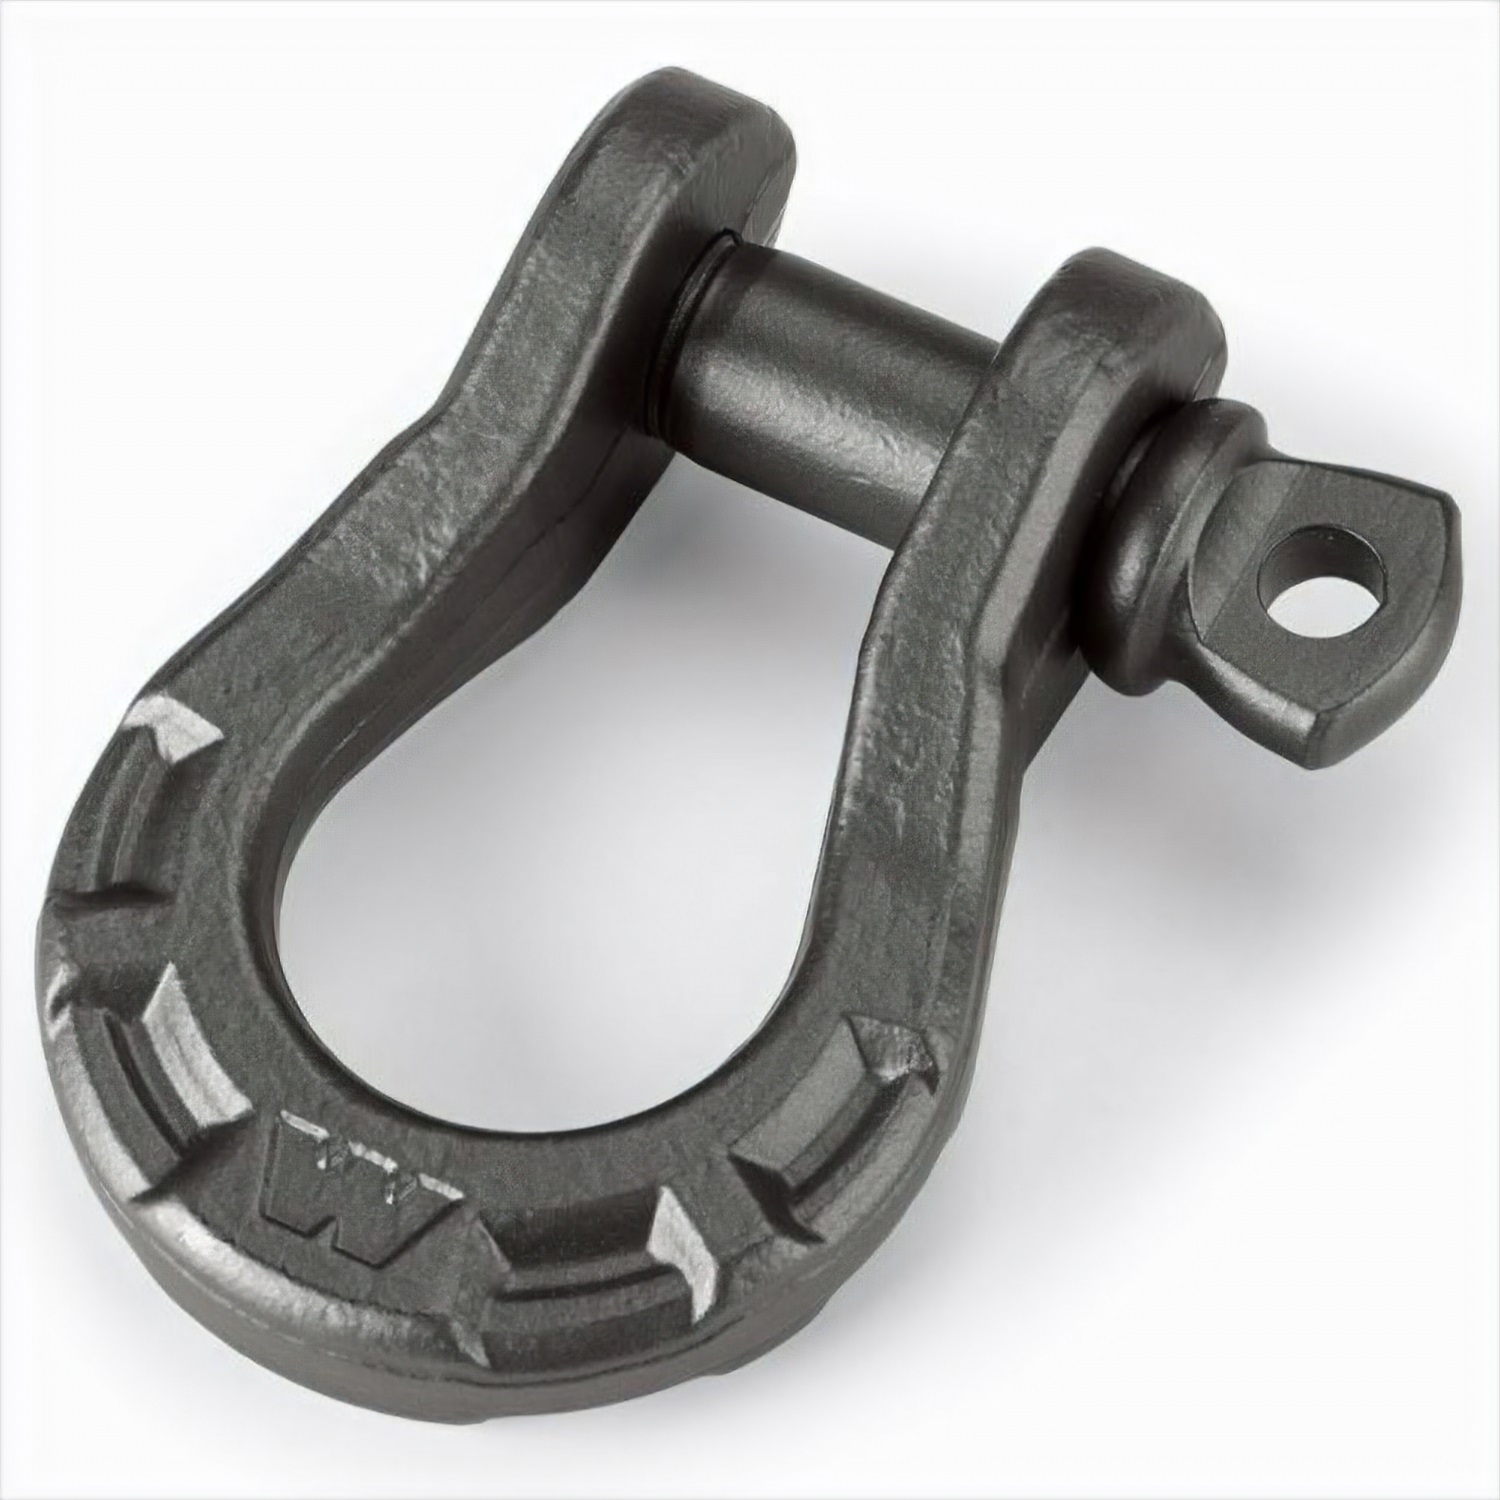 EPIC D-RING SHACKLE